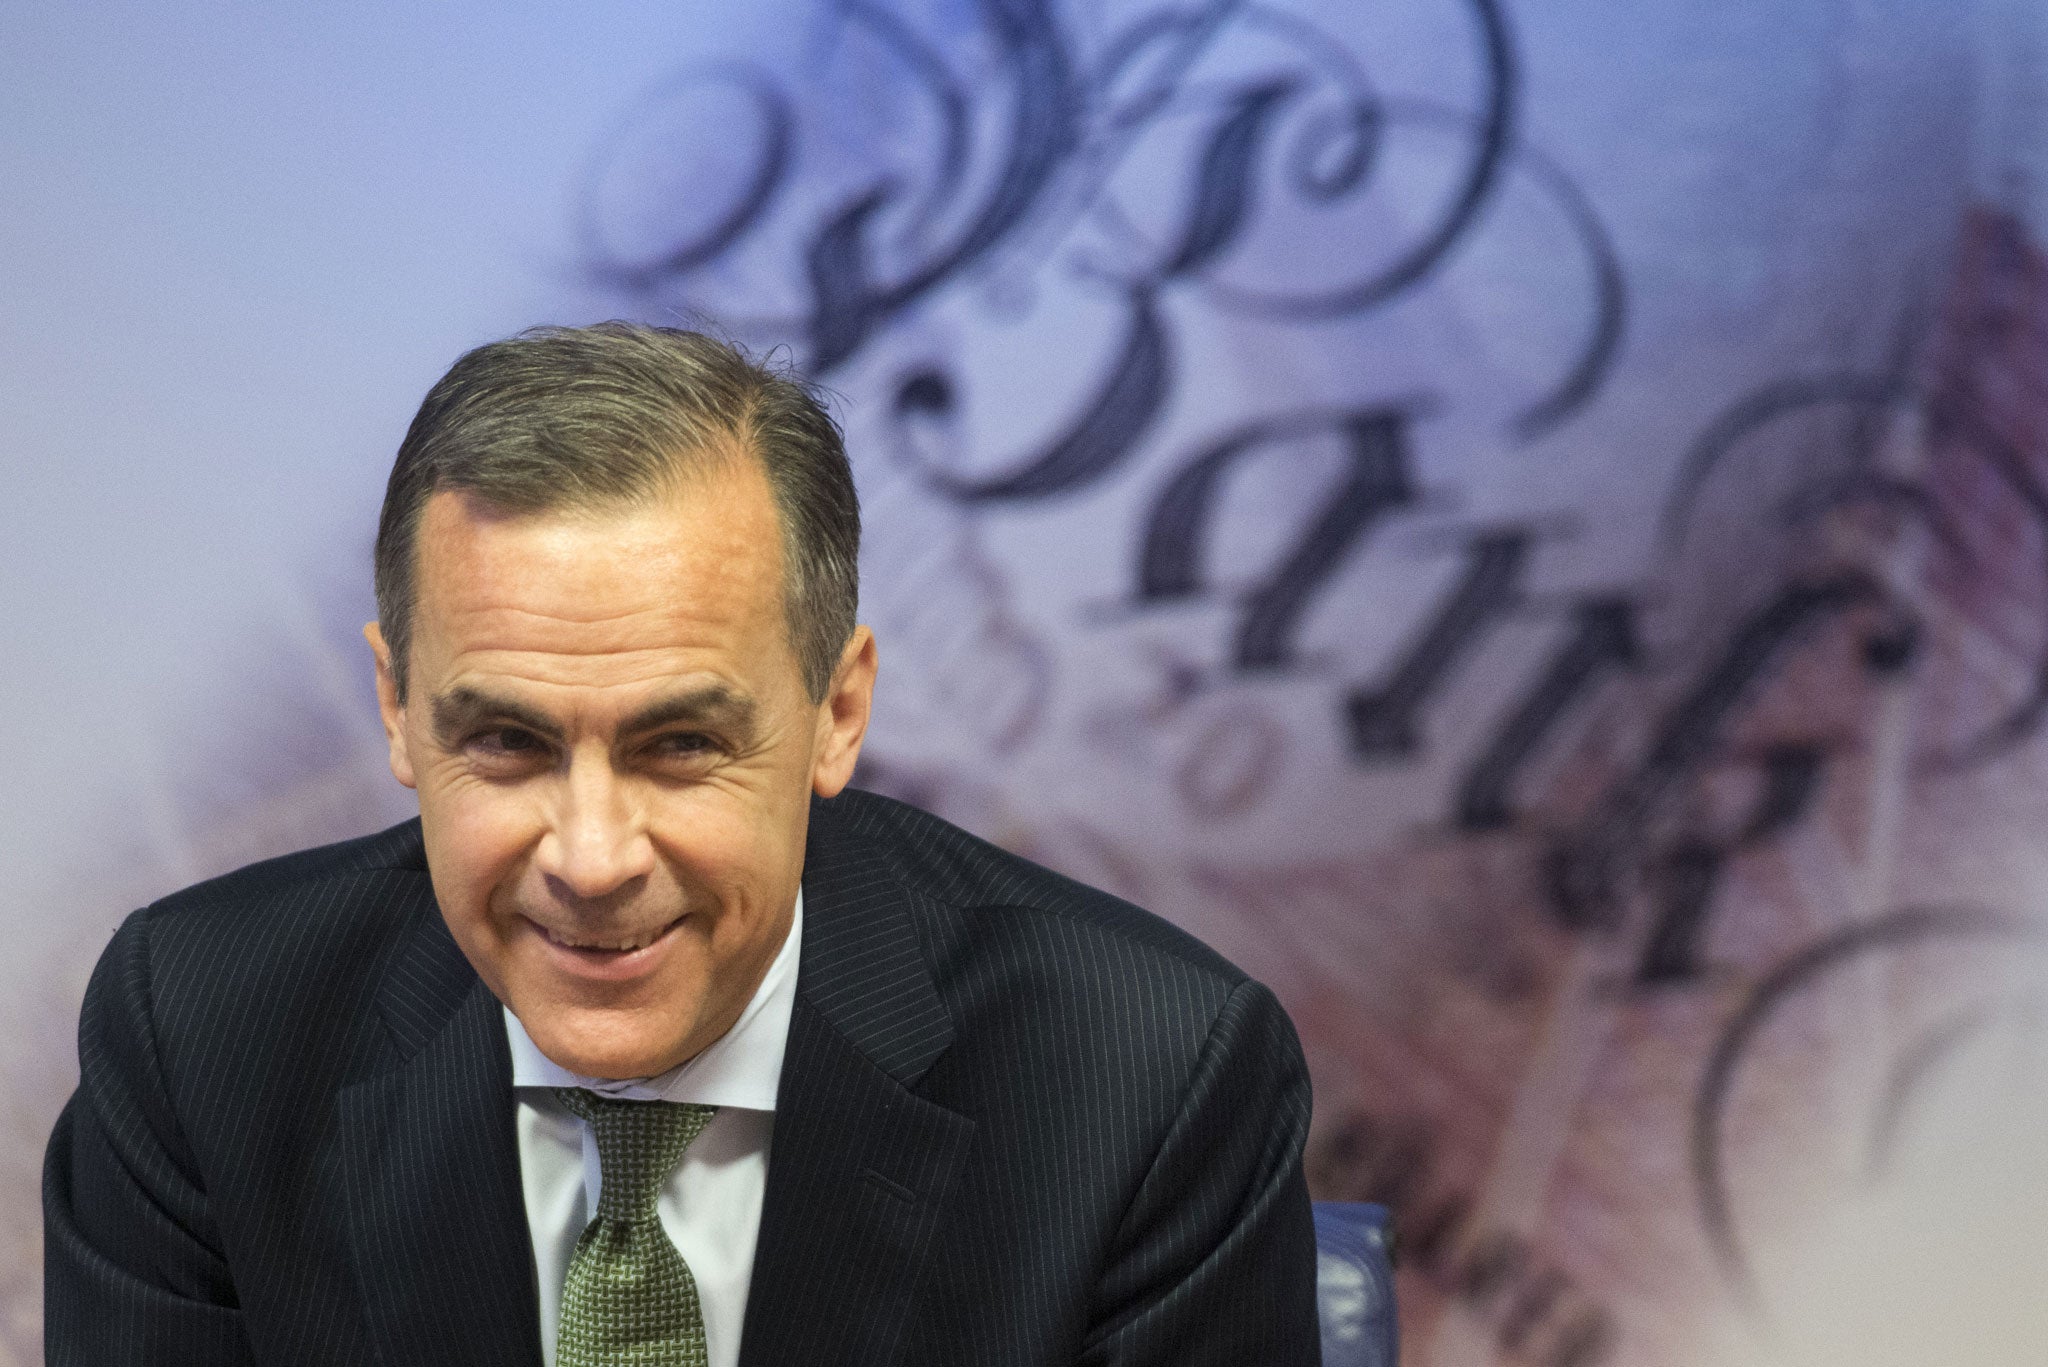 The Bank of England governor is being forced to act after unemployment rate fell far quicker than expected